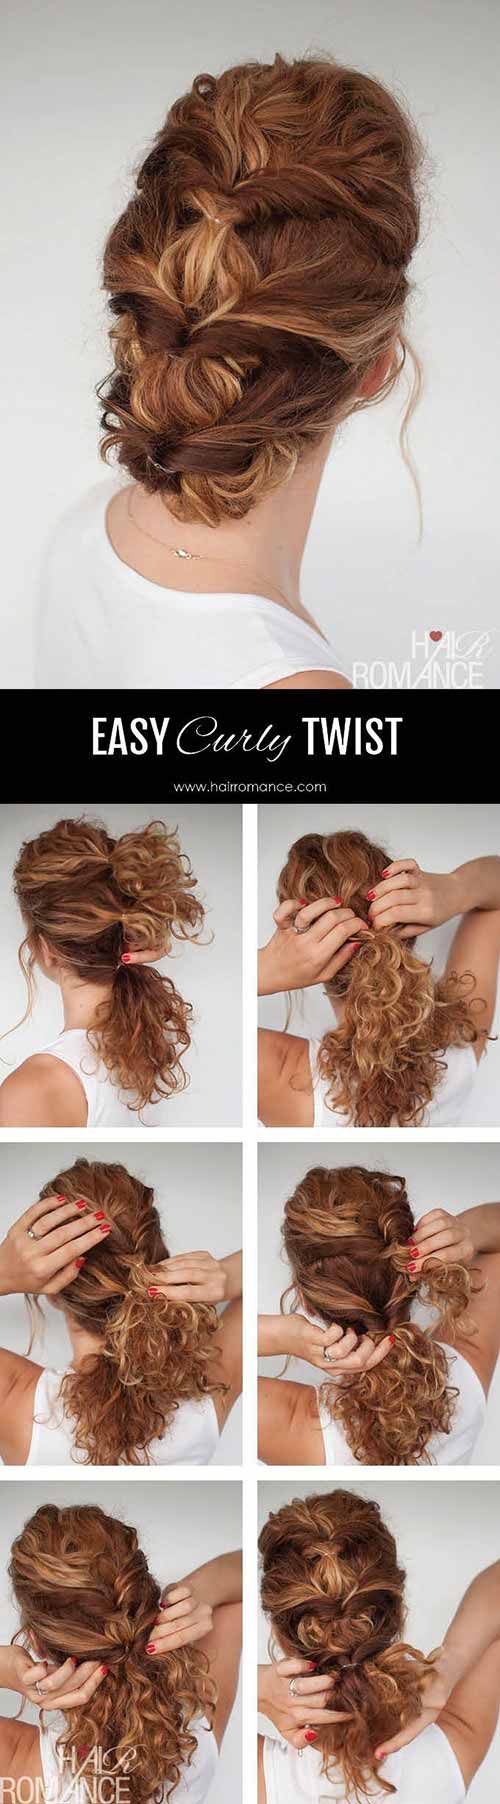 20 Incredibly Stunning Diy Updos For Curly Hair